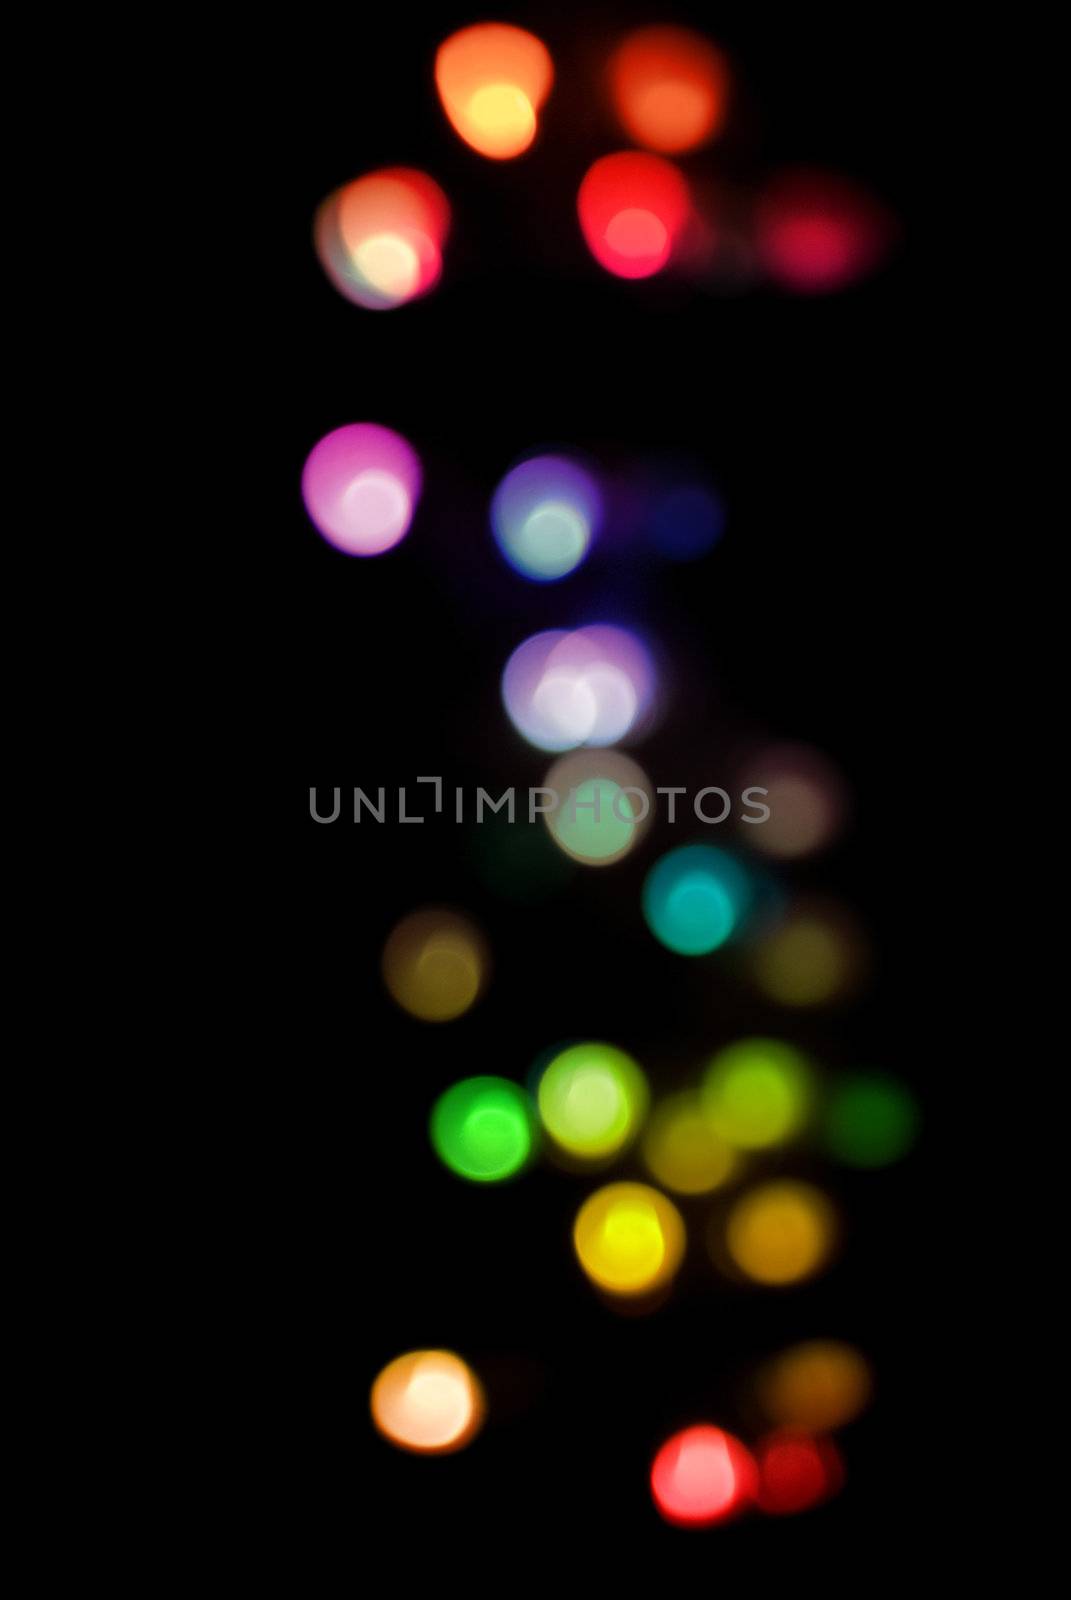 a festive background of colorful defuse lights